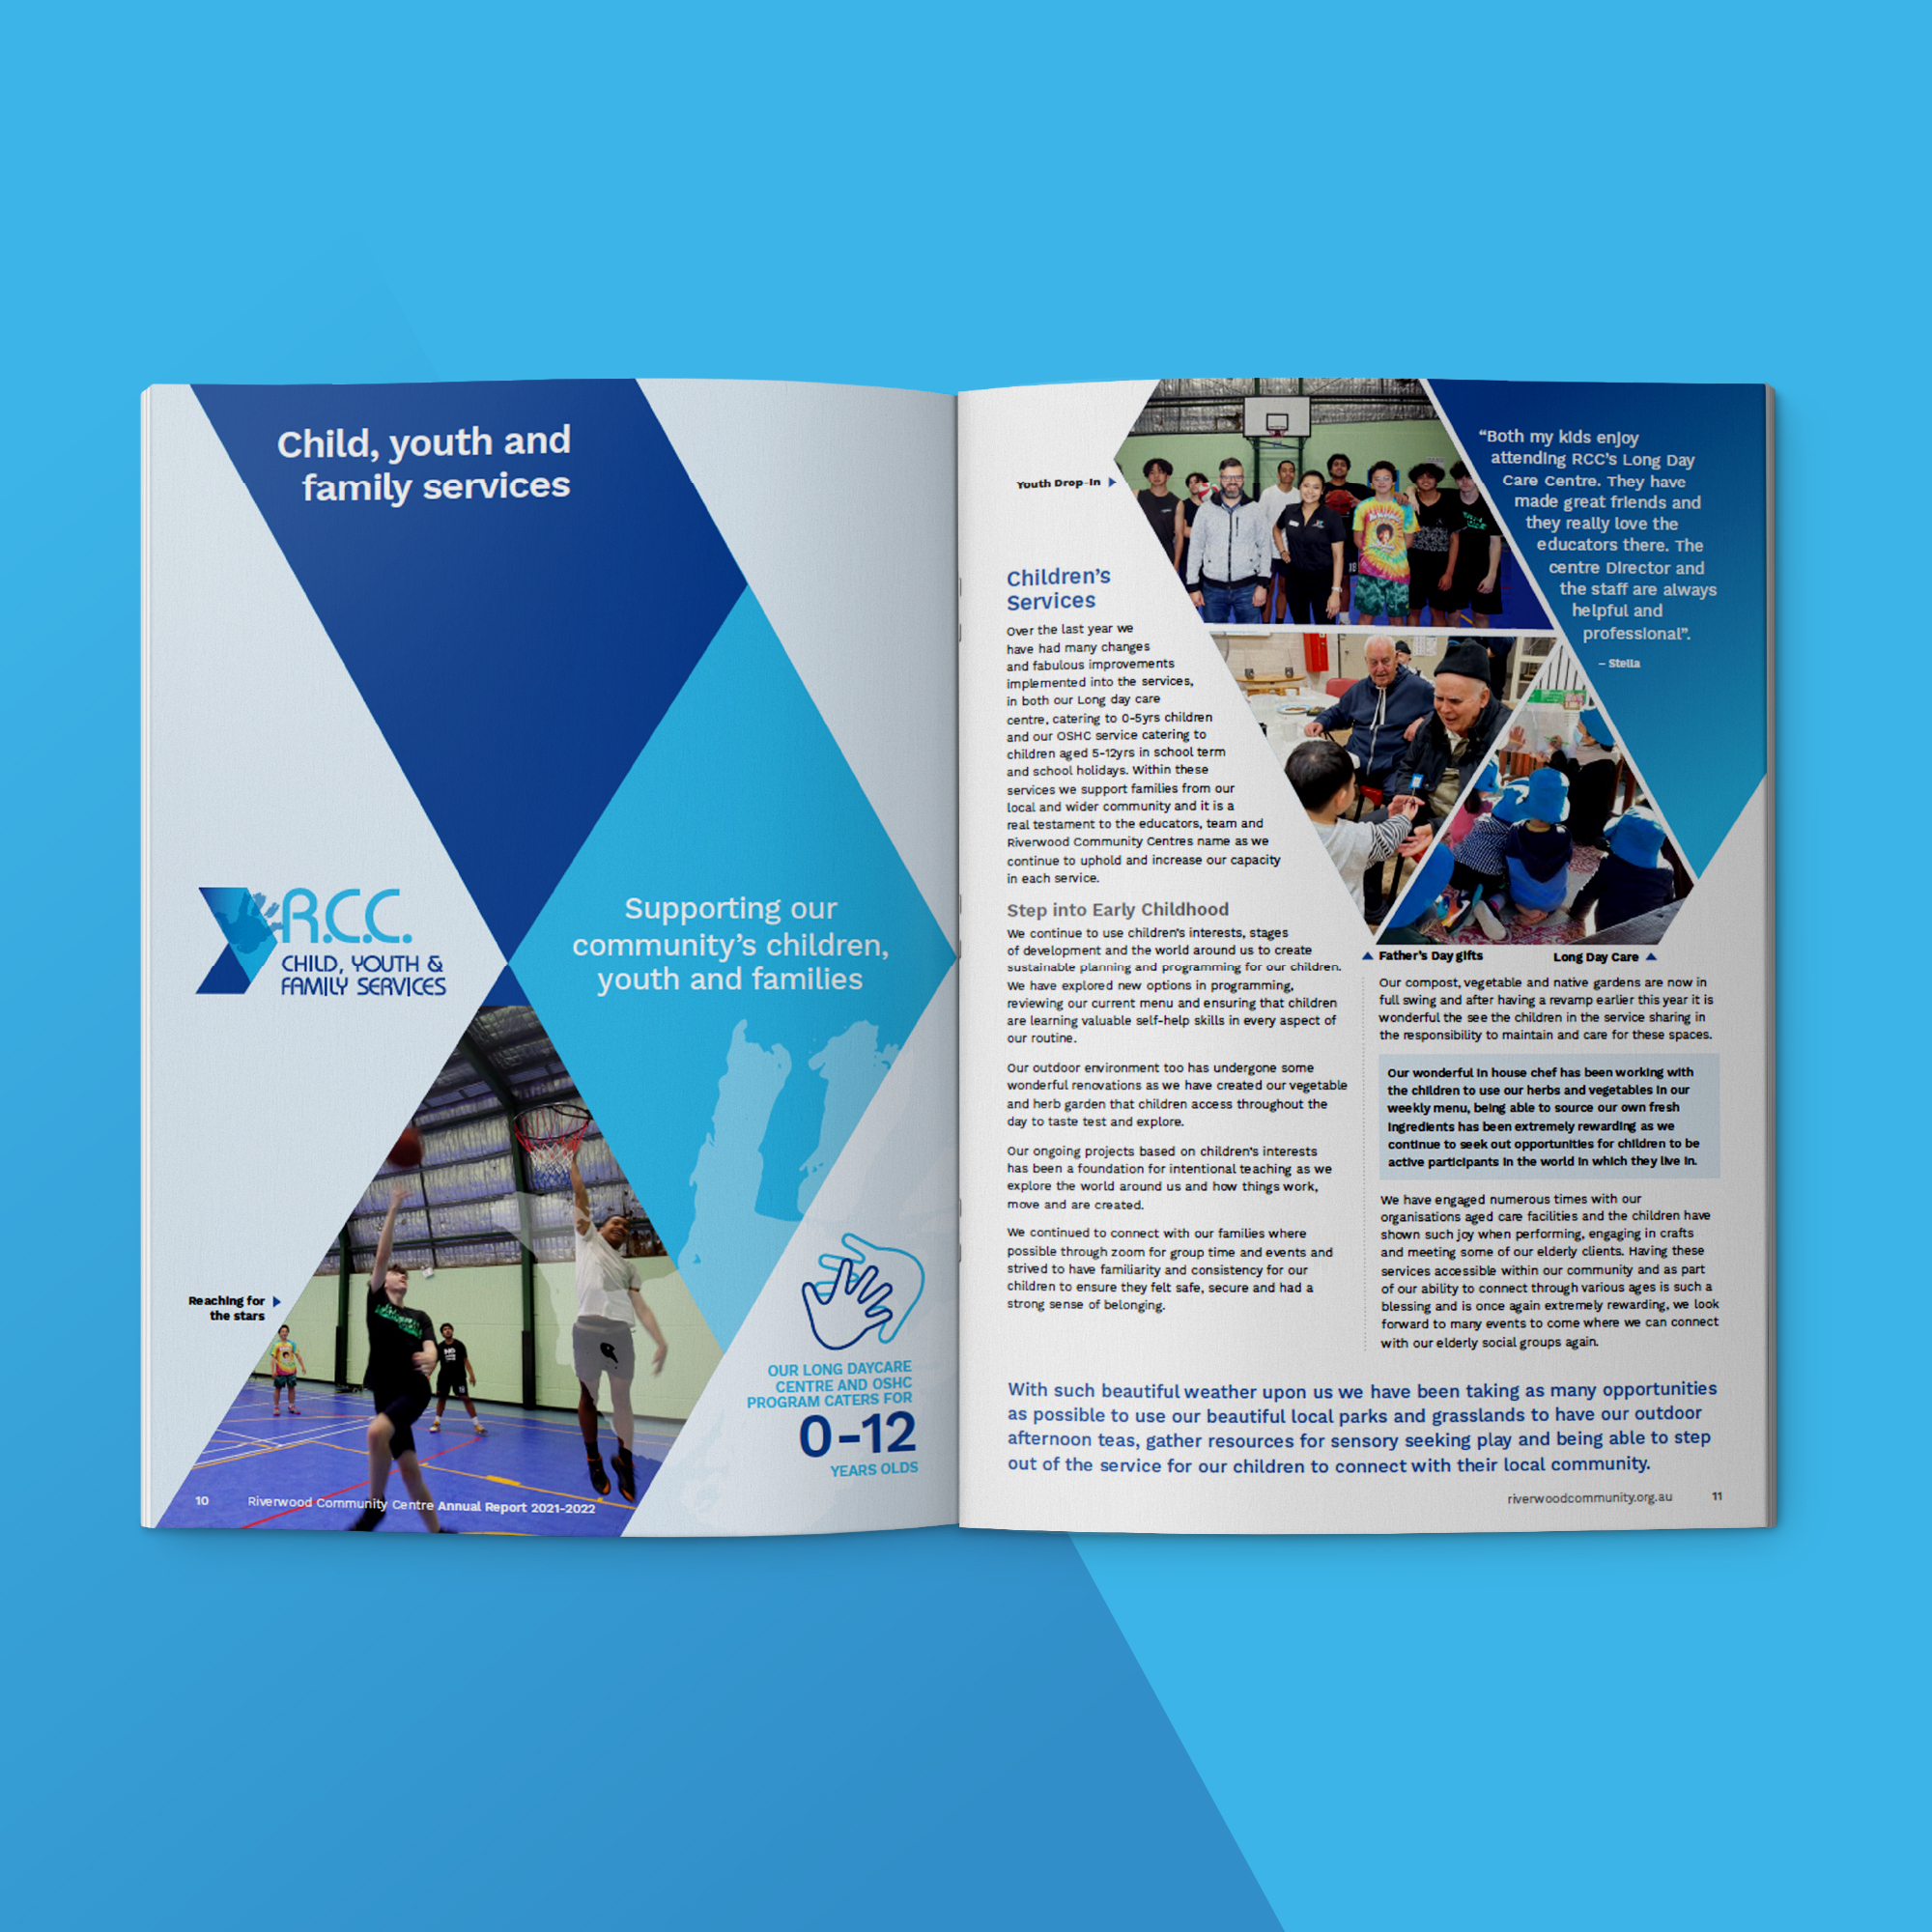 RCC 2021-22 Annual Report - Child, Youth and Family Services spread